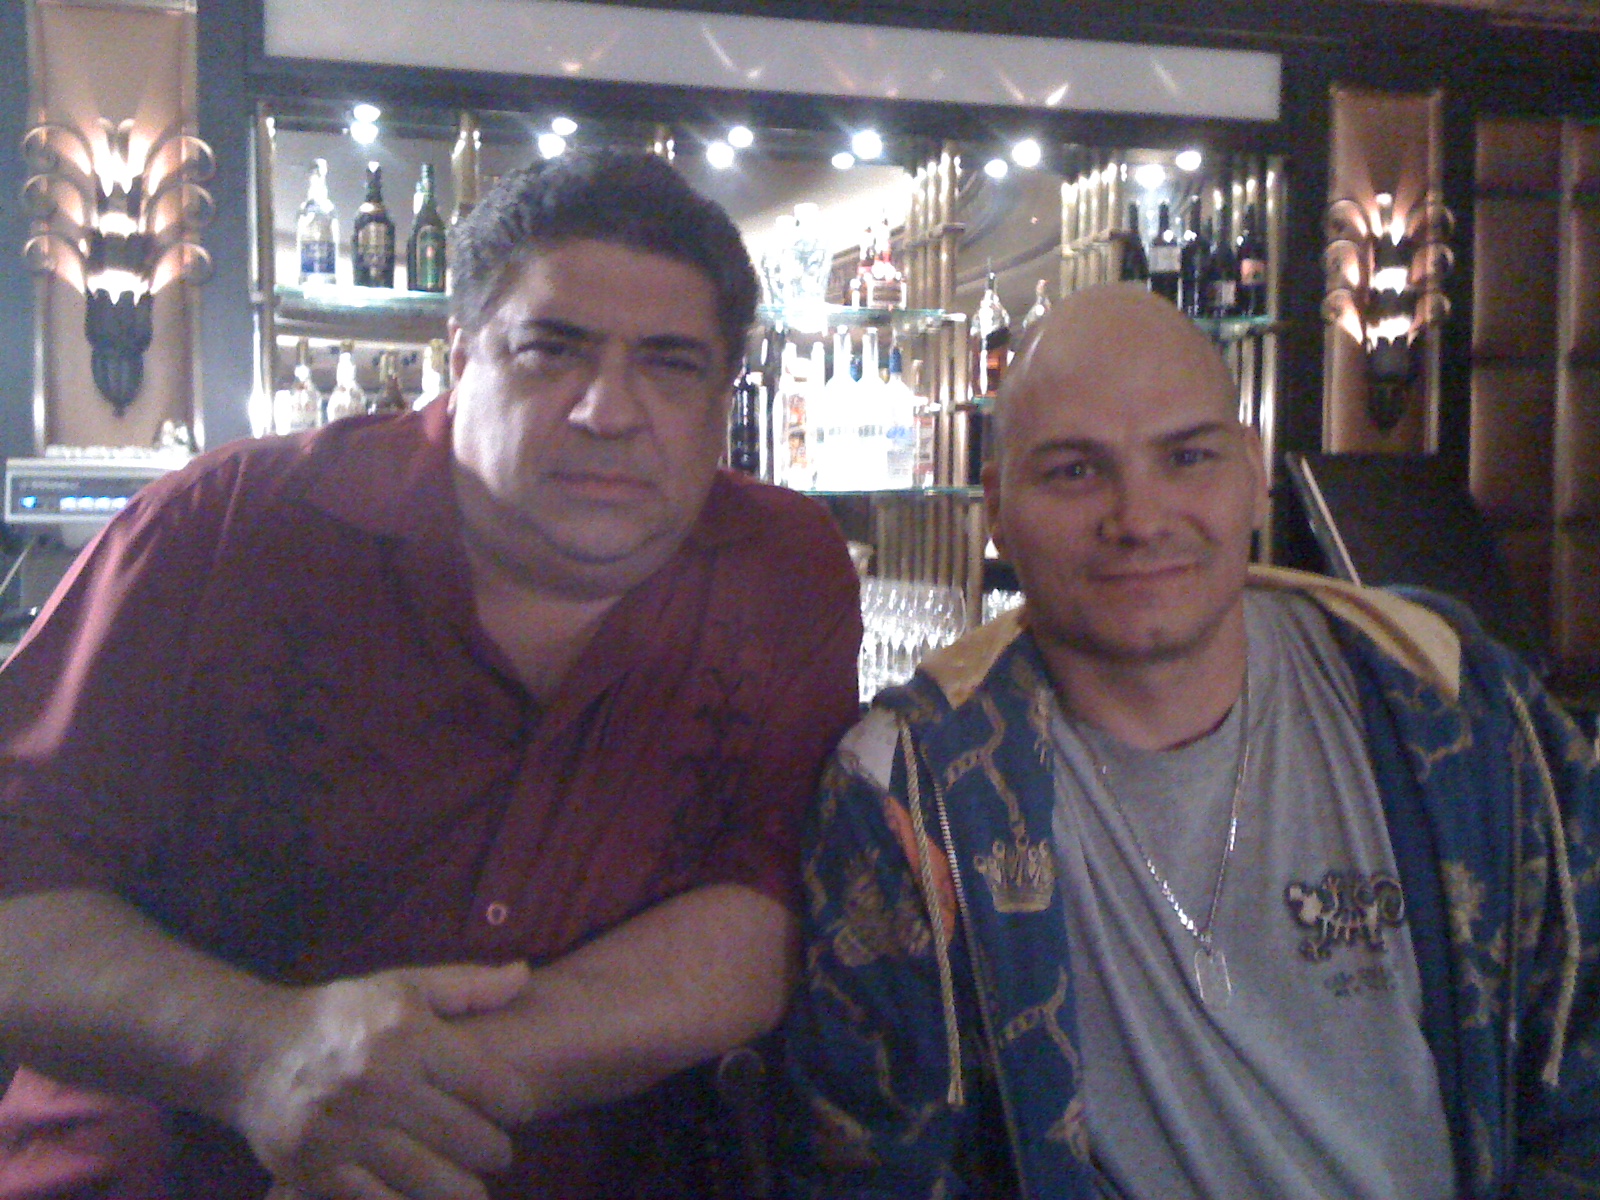 Jeremy and Vincent Pastore on 